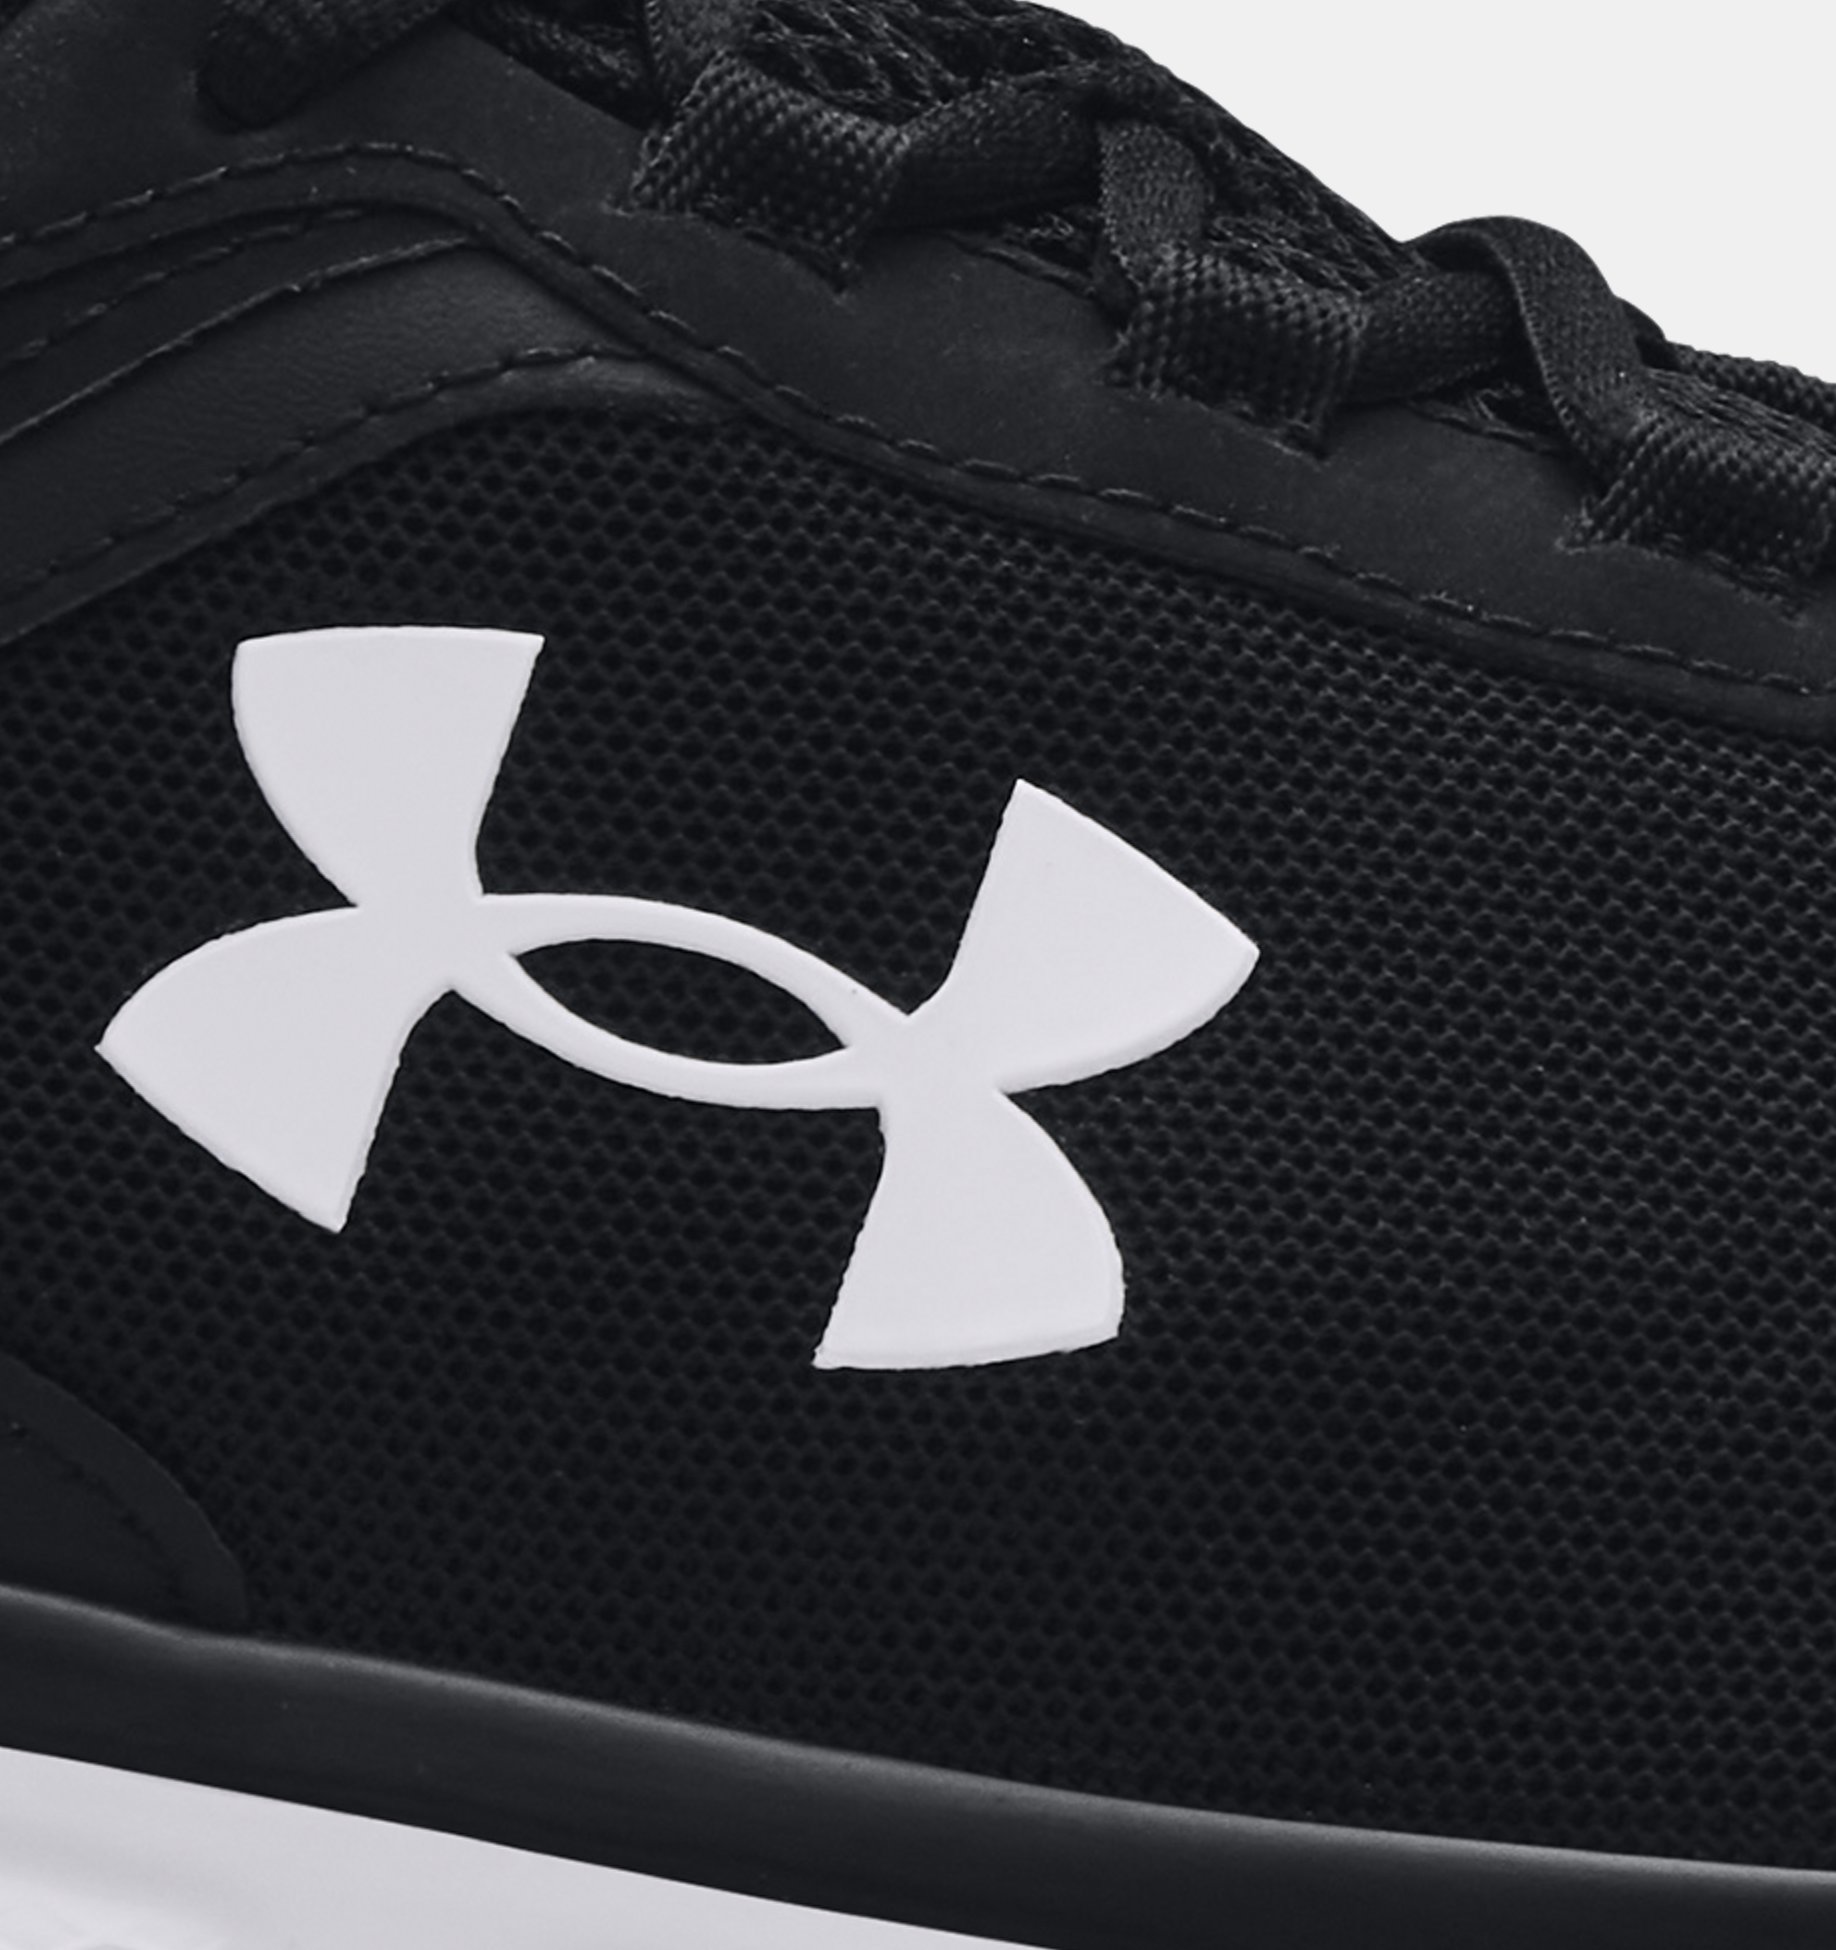 Does Under Armour Have Wide Shoes?